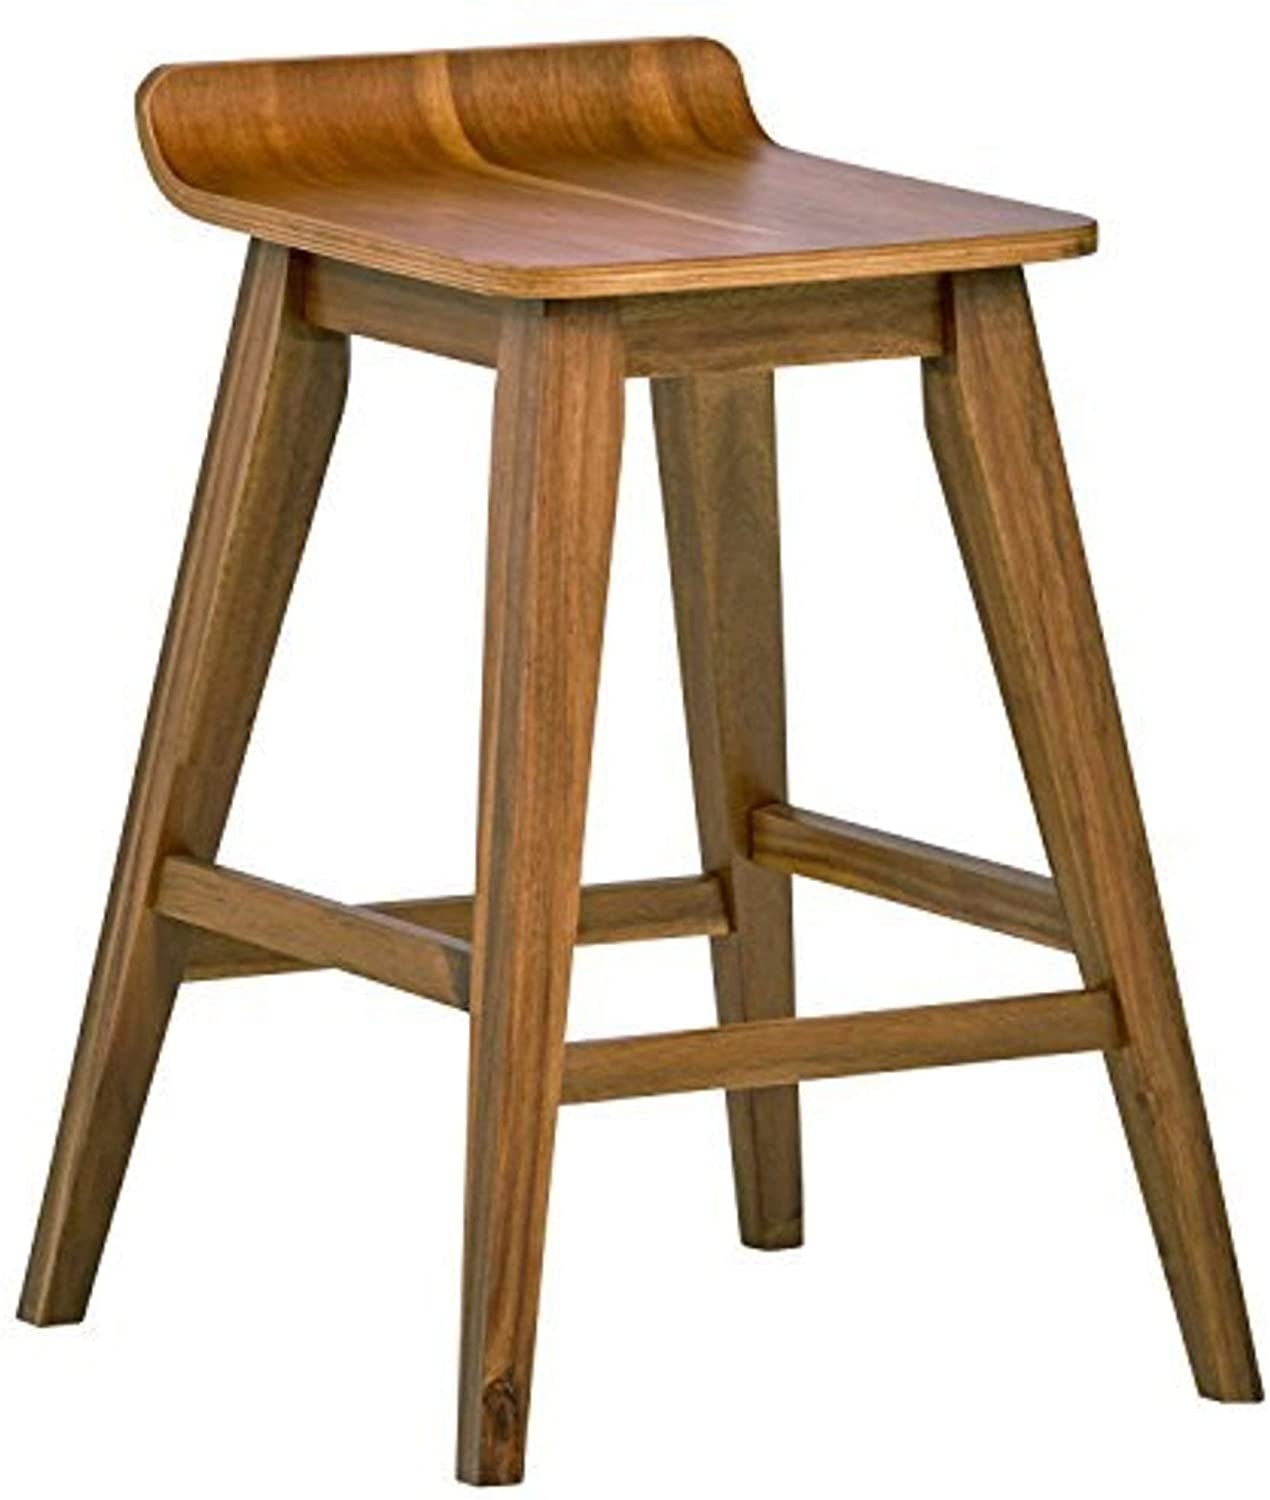 Amazon Brand – Stone & Beam Fremont Rustic Kitchen Counter Saddle Farmhouse Bar Stool, 25.5 Inch Height, Natural Wood